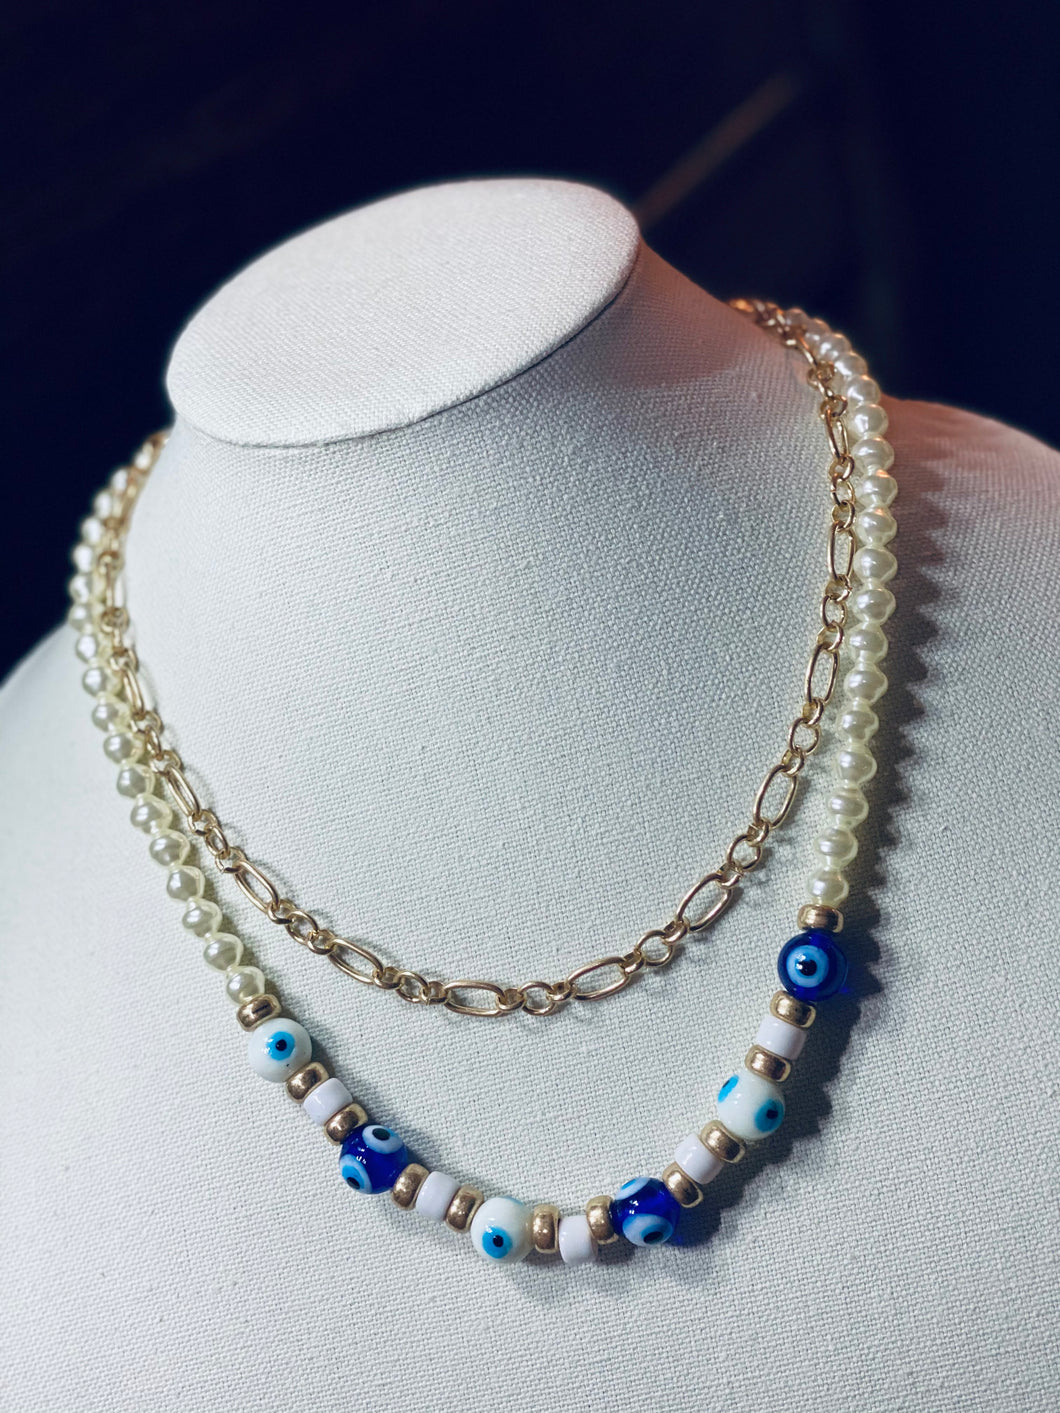 Beaded Evil Eye Necklace with Pearls